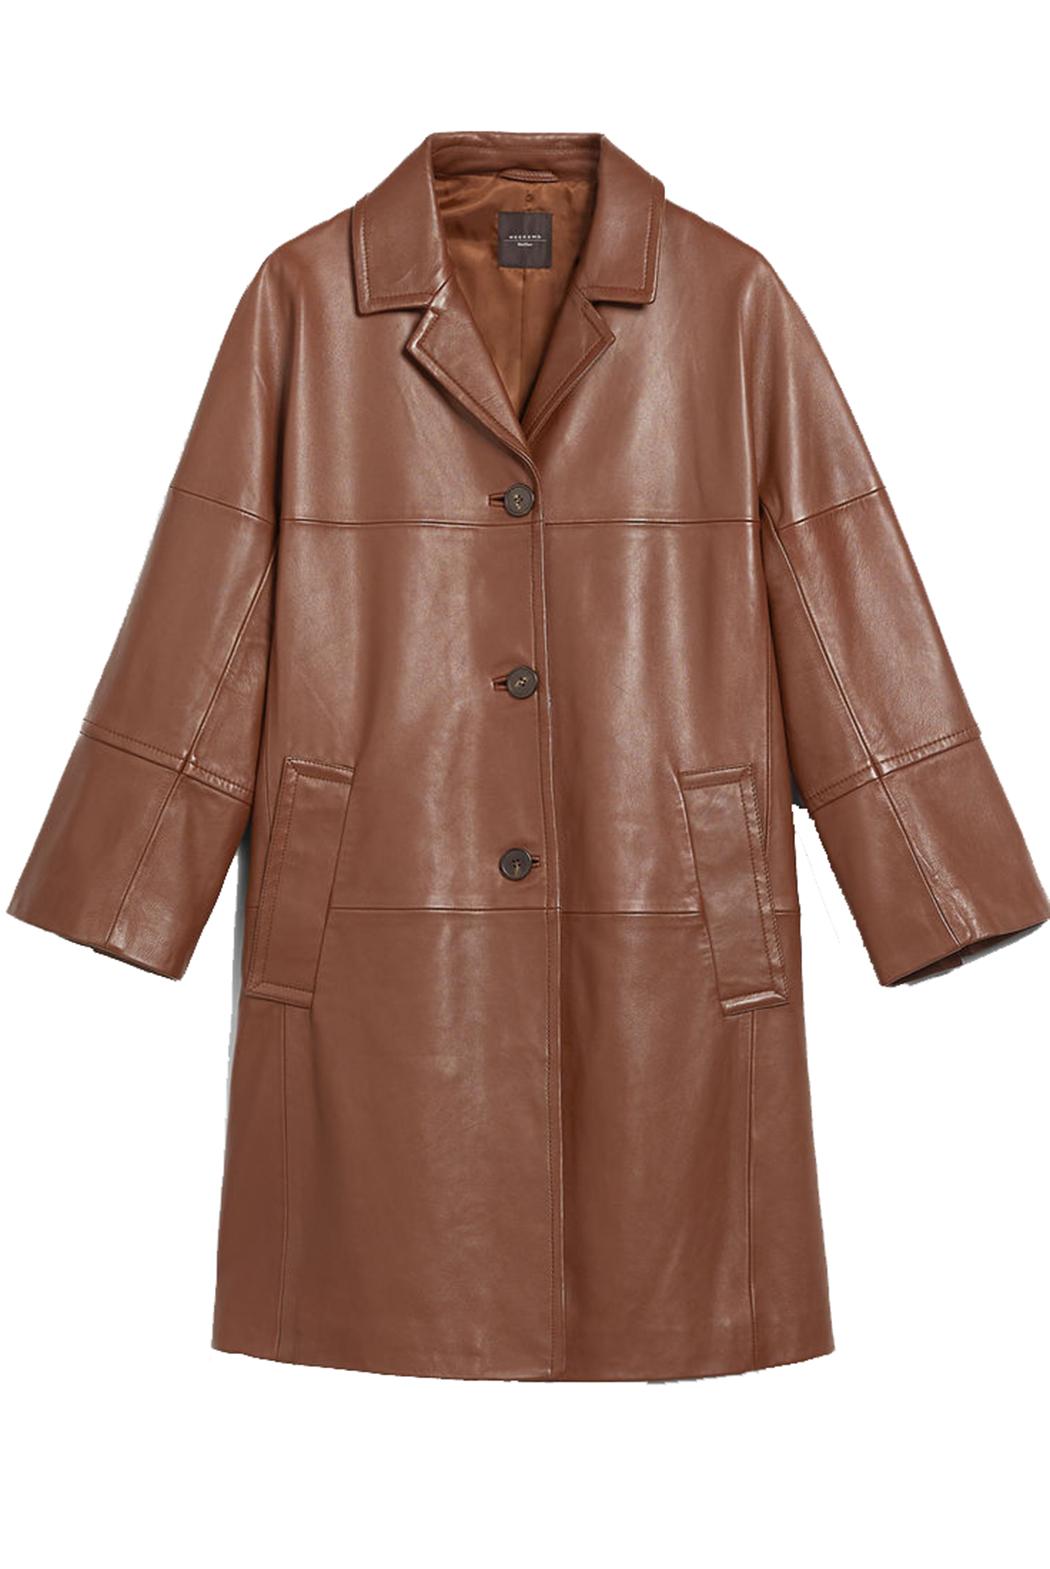 Weekend by Maxmara Civada Nappa Leather Duster Coat in Brown | Lyst